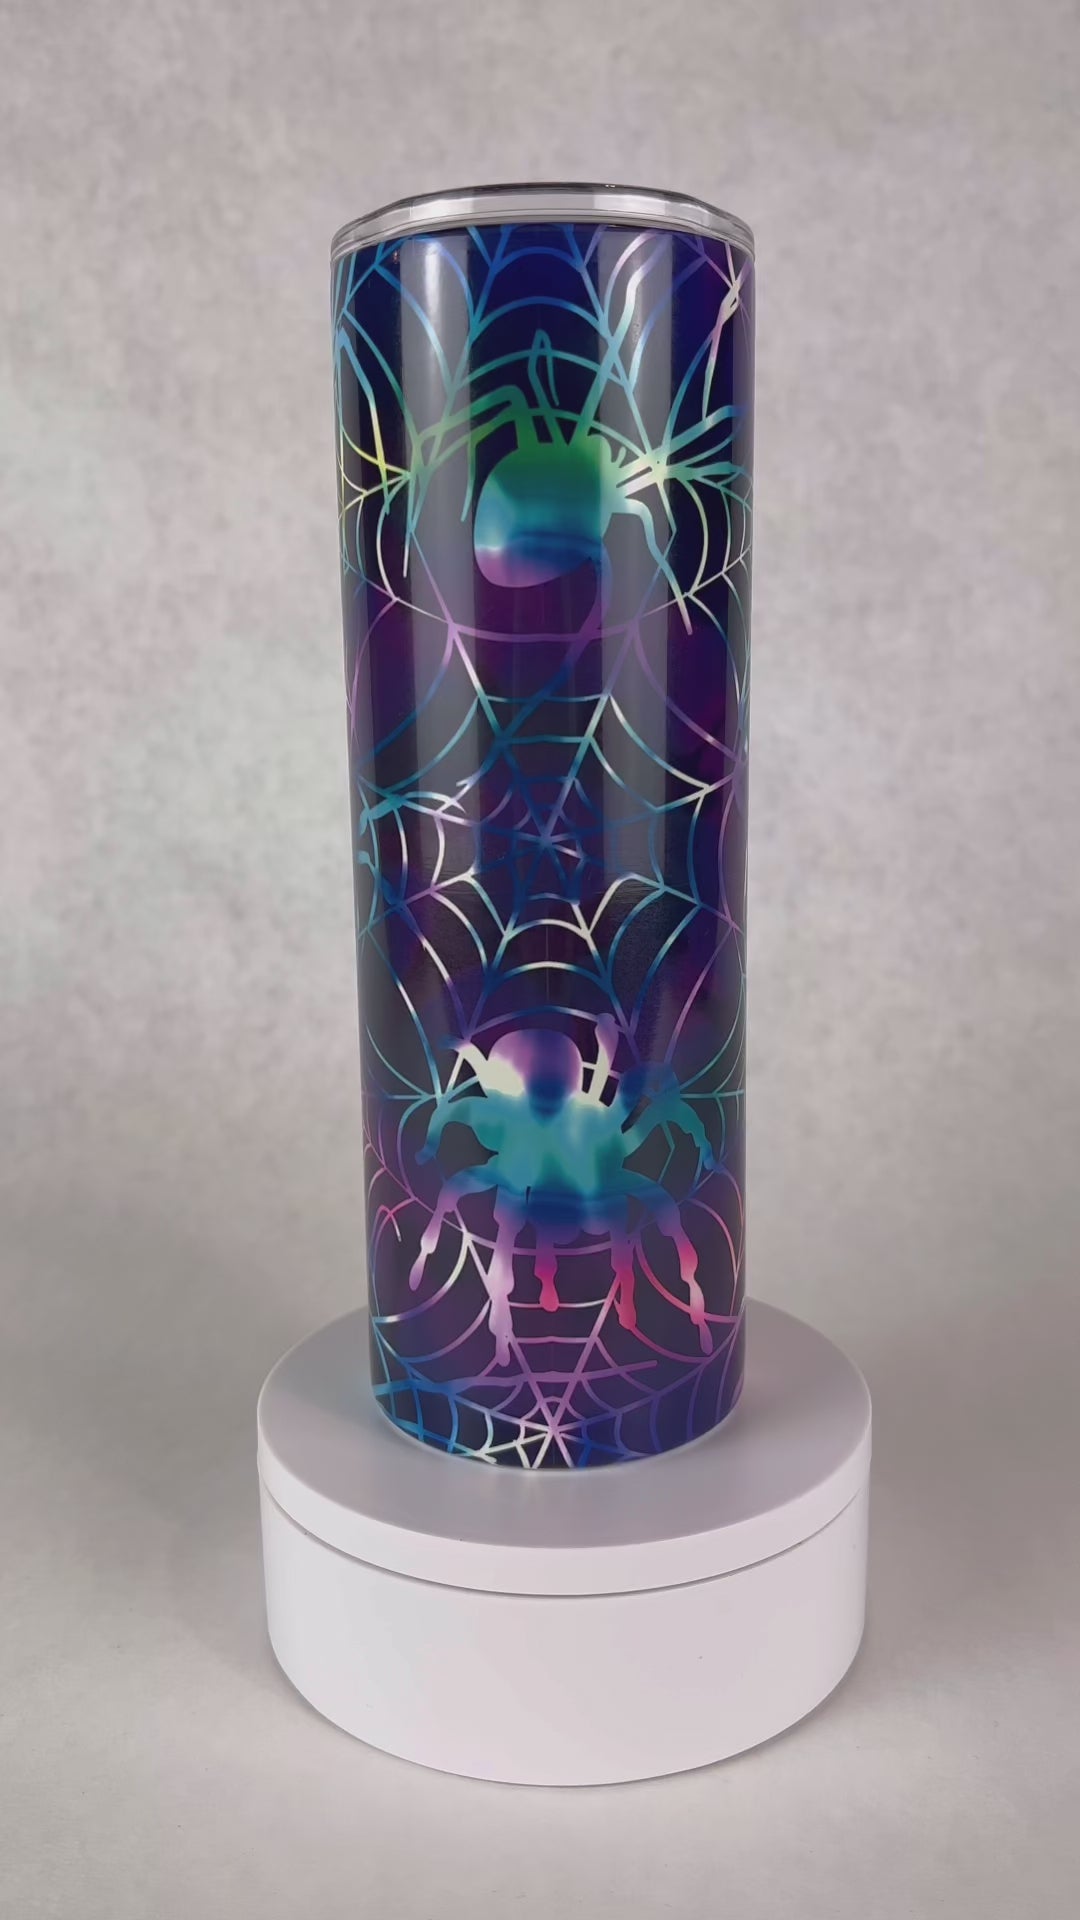 20 oz. Black and Neon Tie-dyed Spiders Tumbler – Take 2 Creative Designs